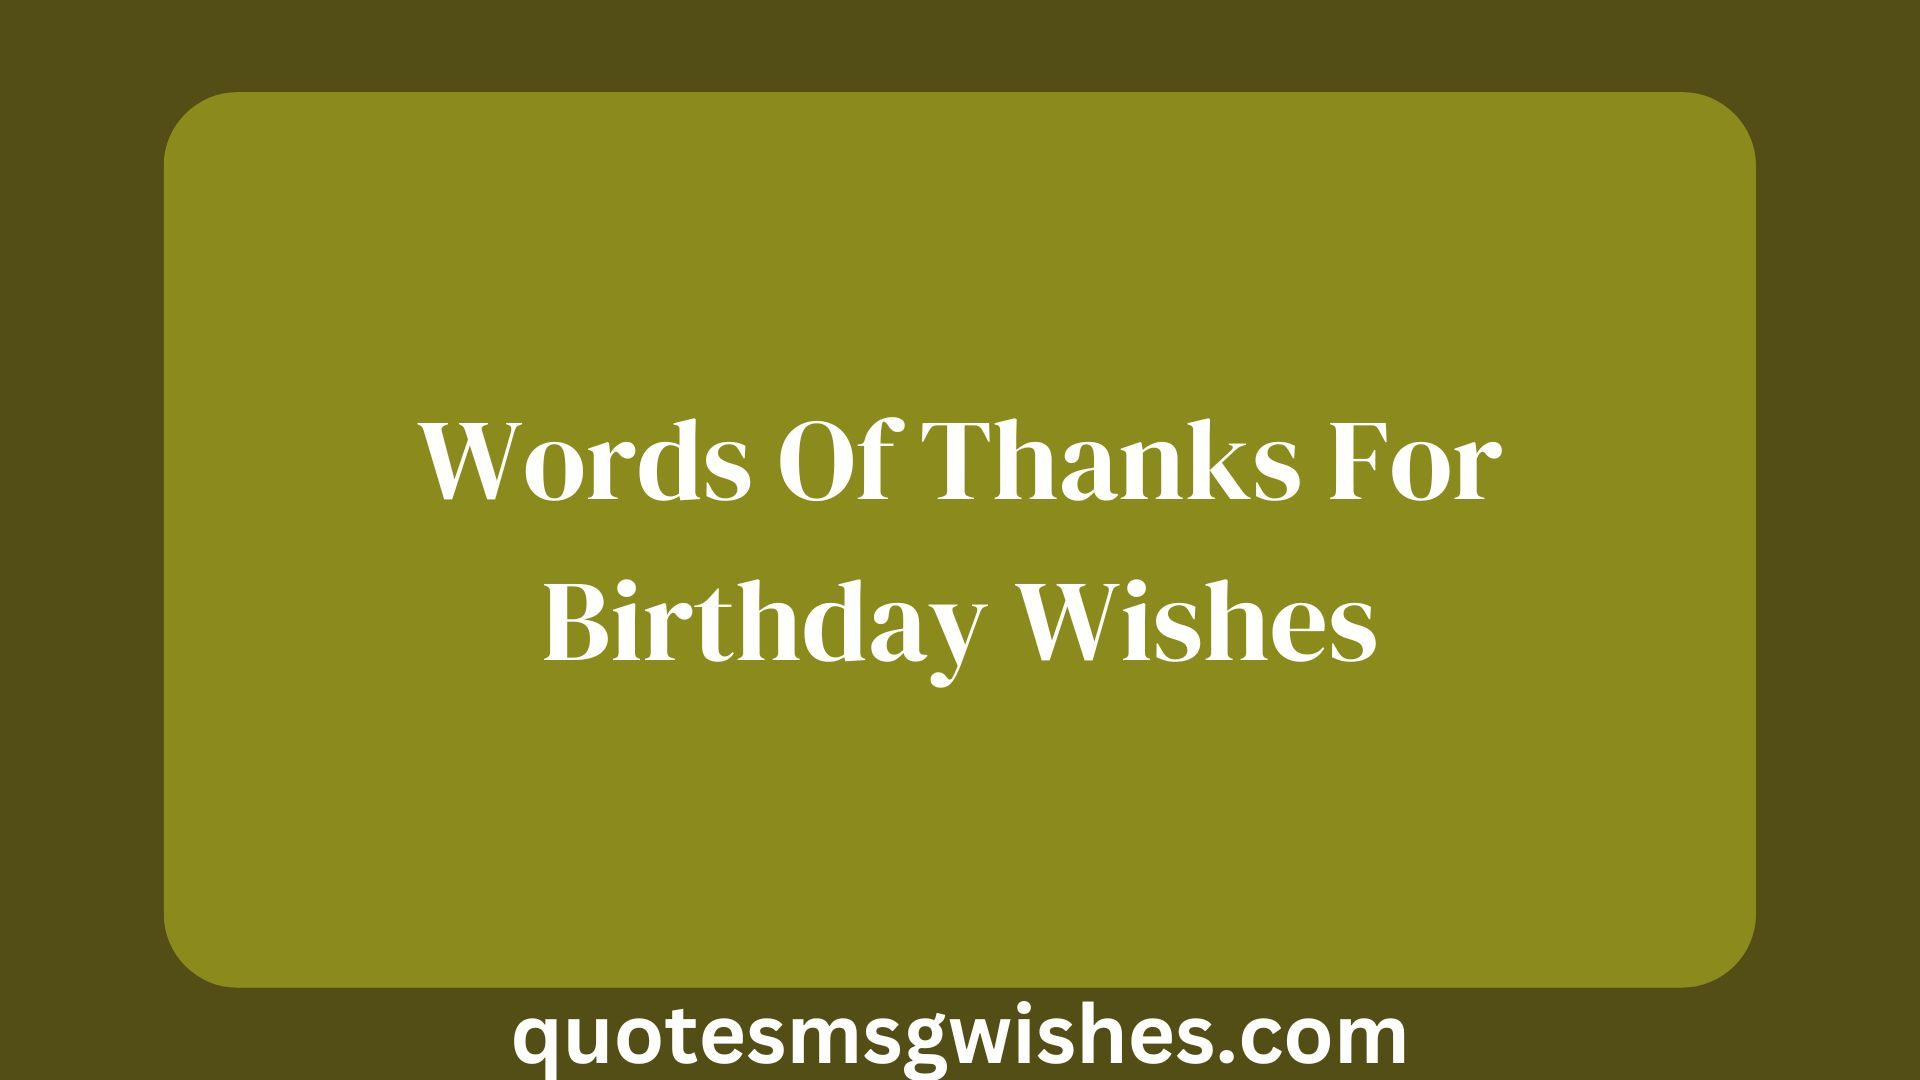 55 Words Of Thanks For Birthday Wishes for Friend and Family ...